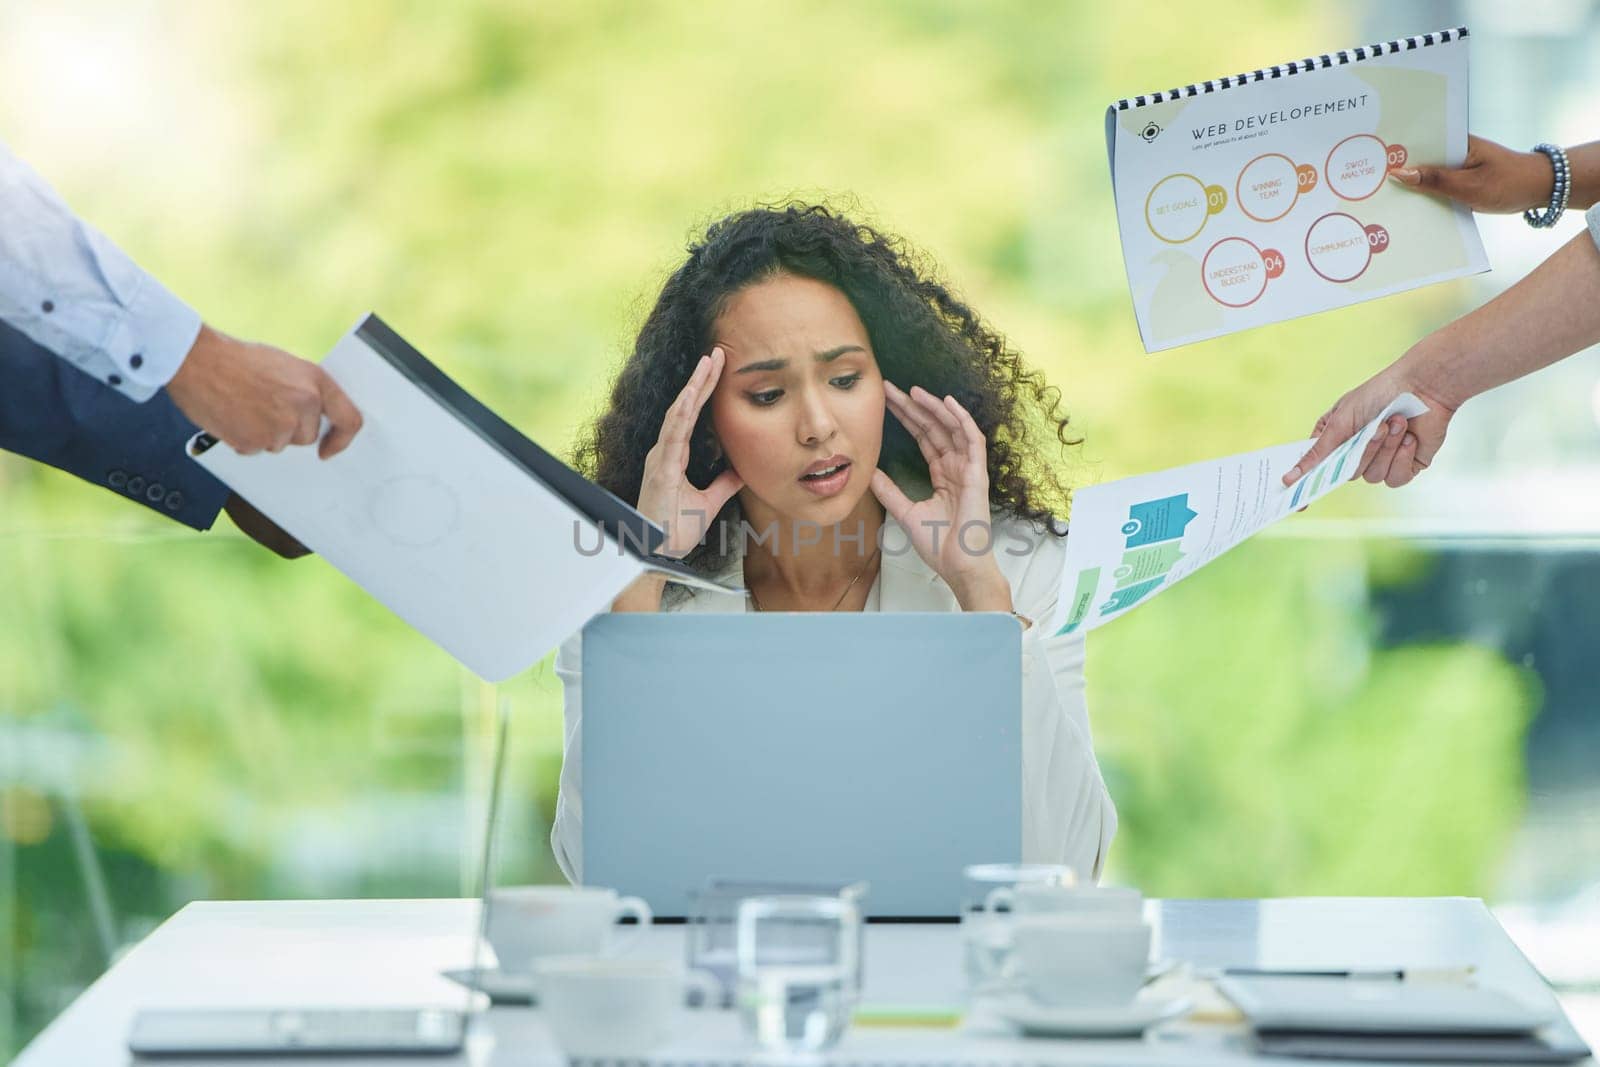 Stress, chaos and business woman on laptop multitasking with documents, paperwork and team project. Corporate boss, burnout and person with headache, anxiety or frustrated in office for collaboration.